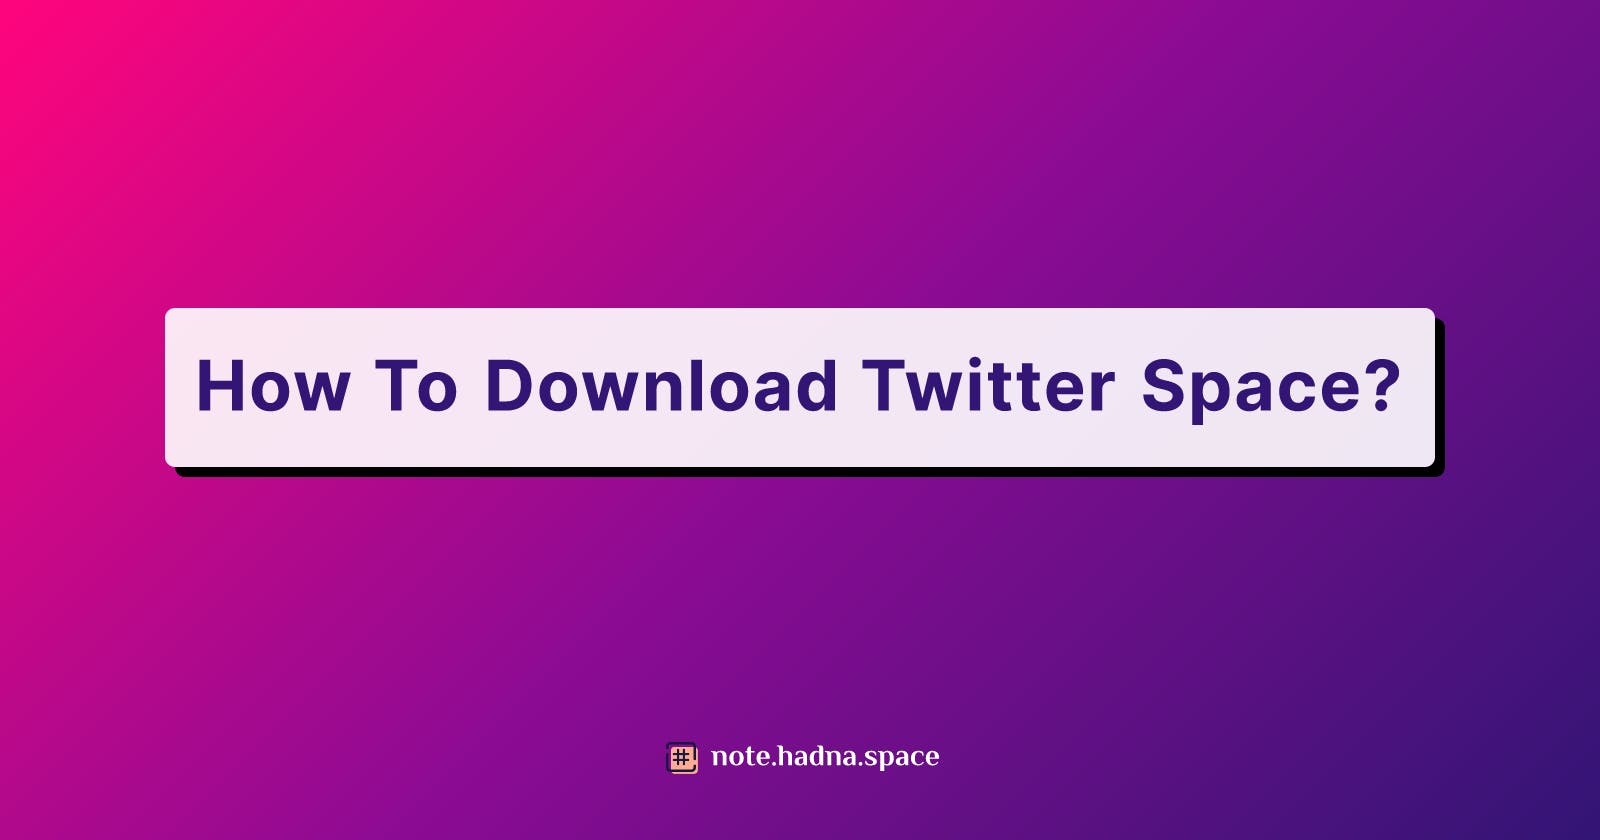 How To Download Twitter Space?